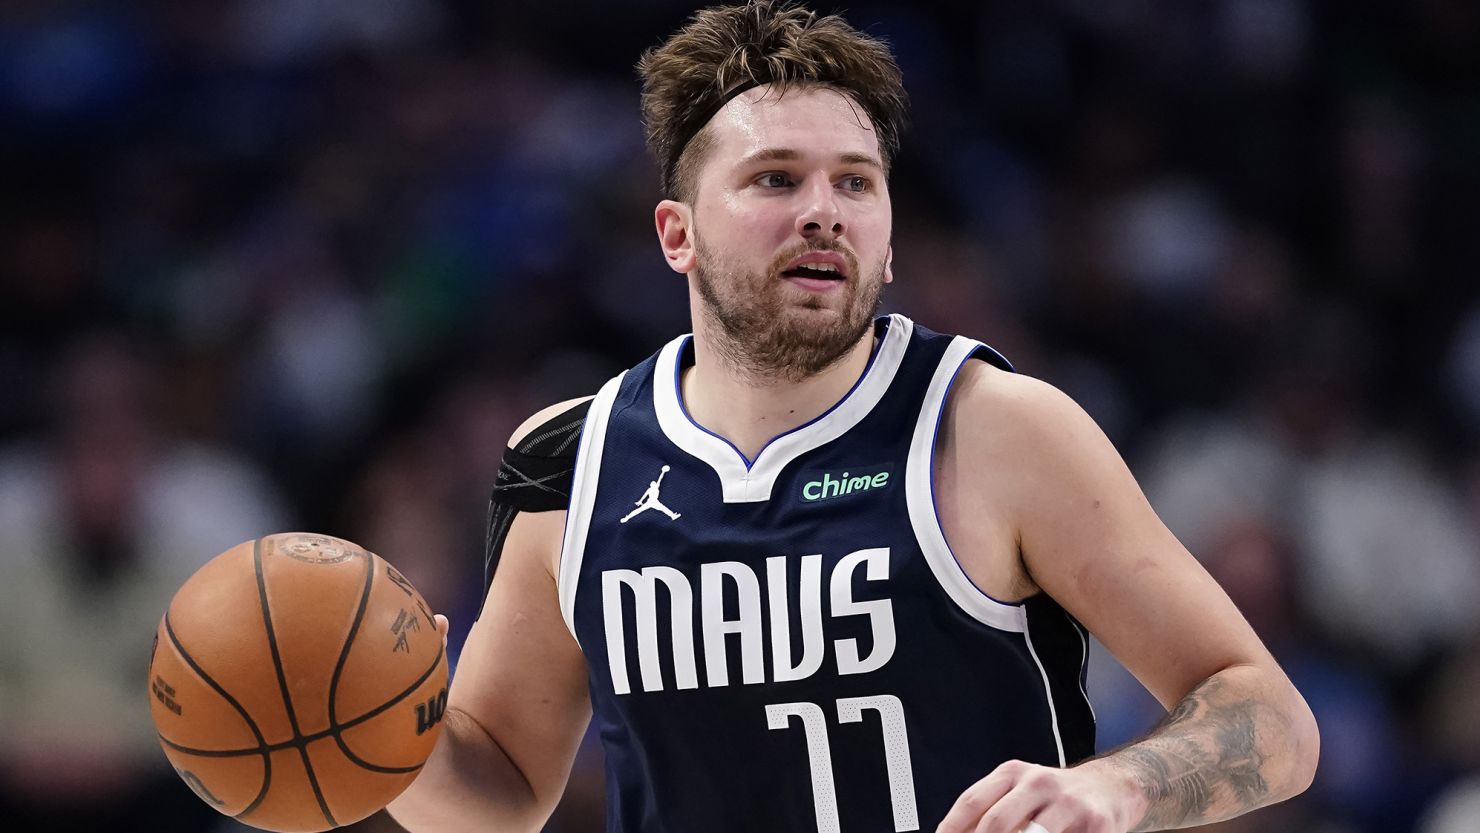 Luka Doncic’s Crazy Trick Shot Labelled “Shot of the Season” Ends Rockets